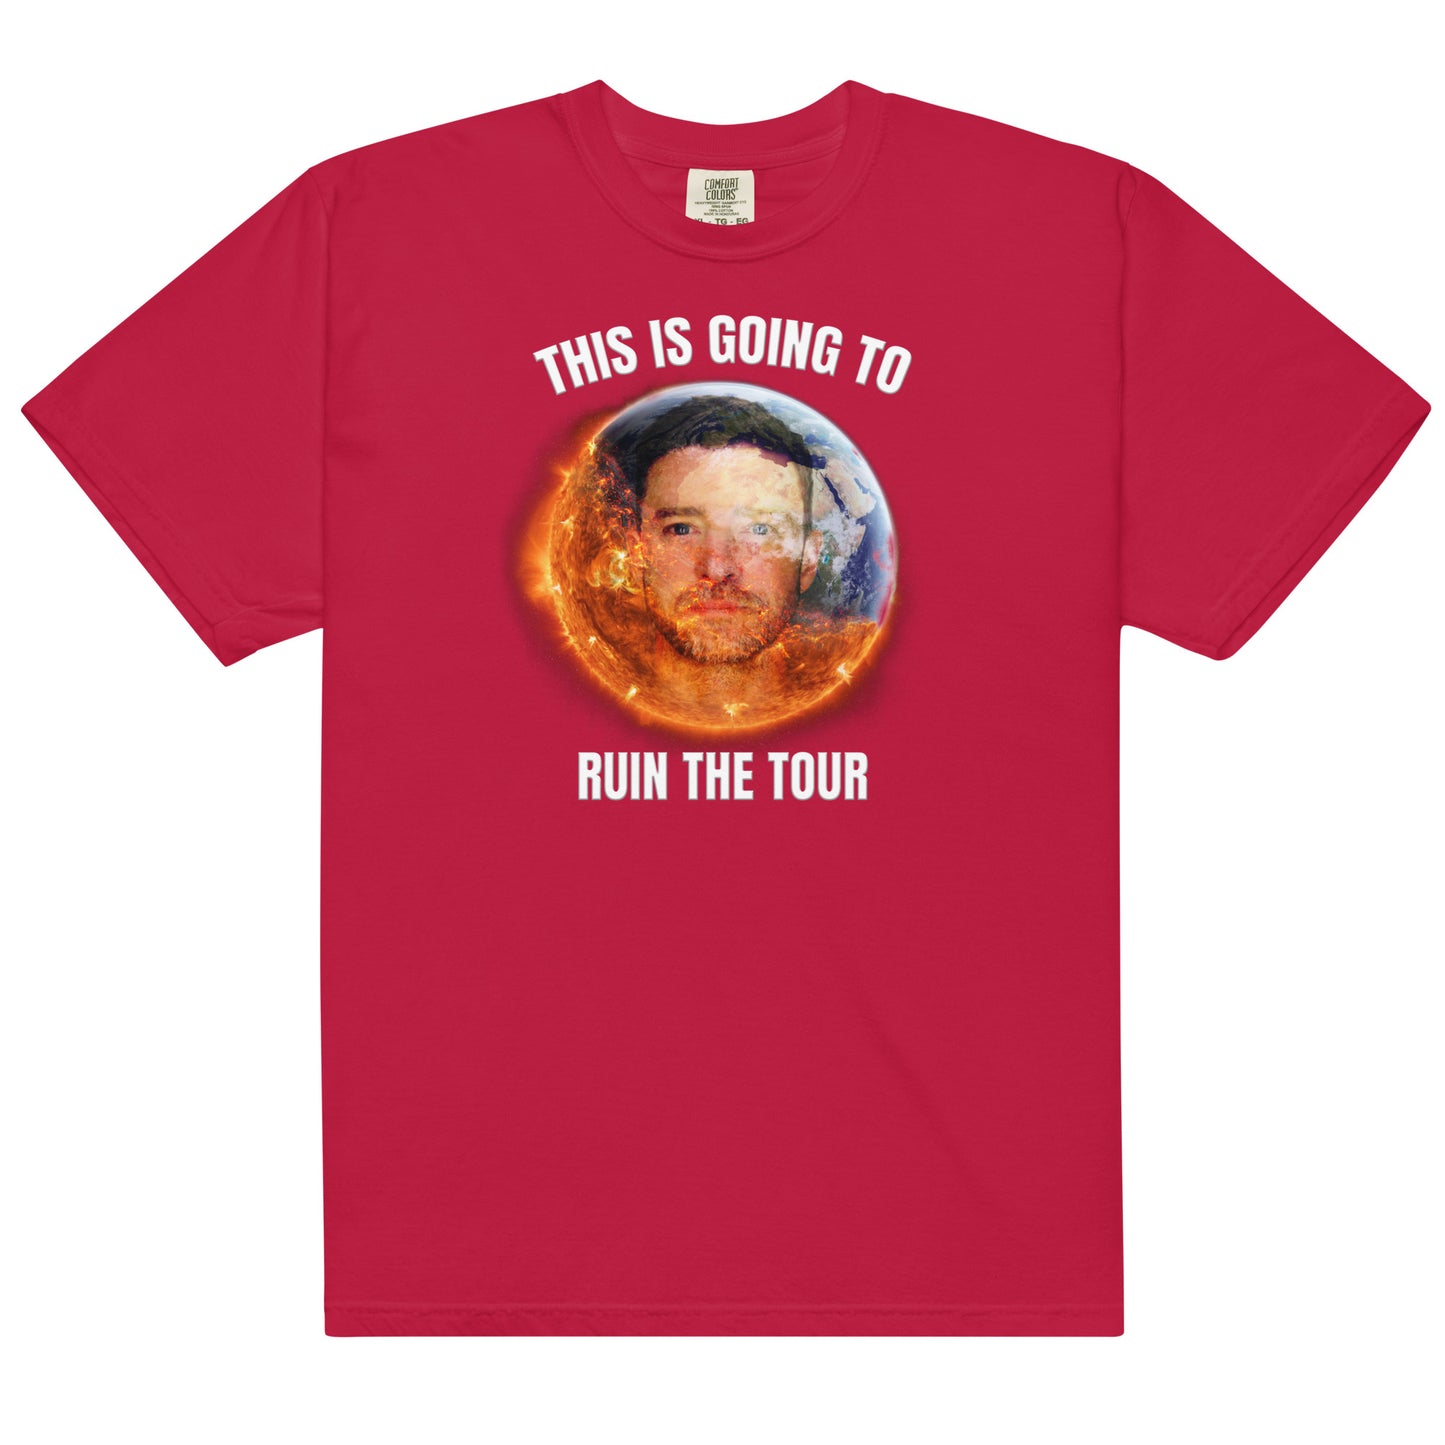 This is Going to Ruin the Tour Unisex t-shirt